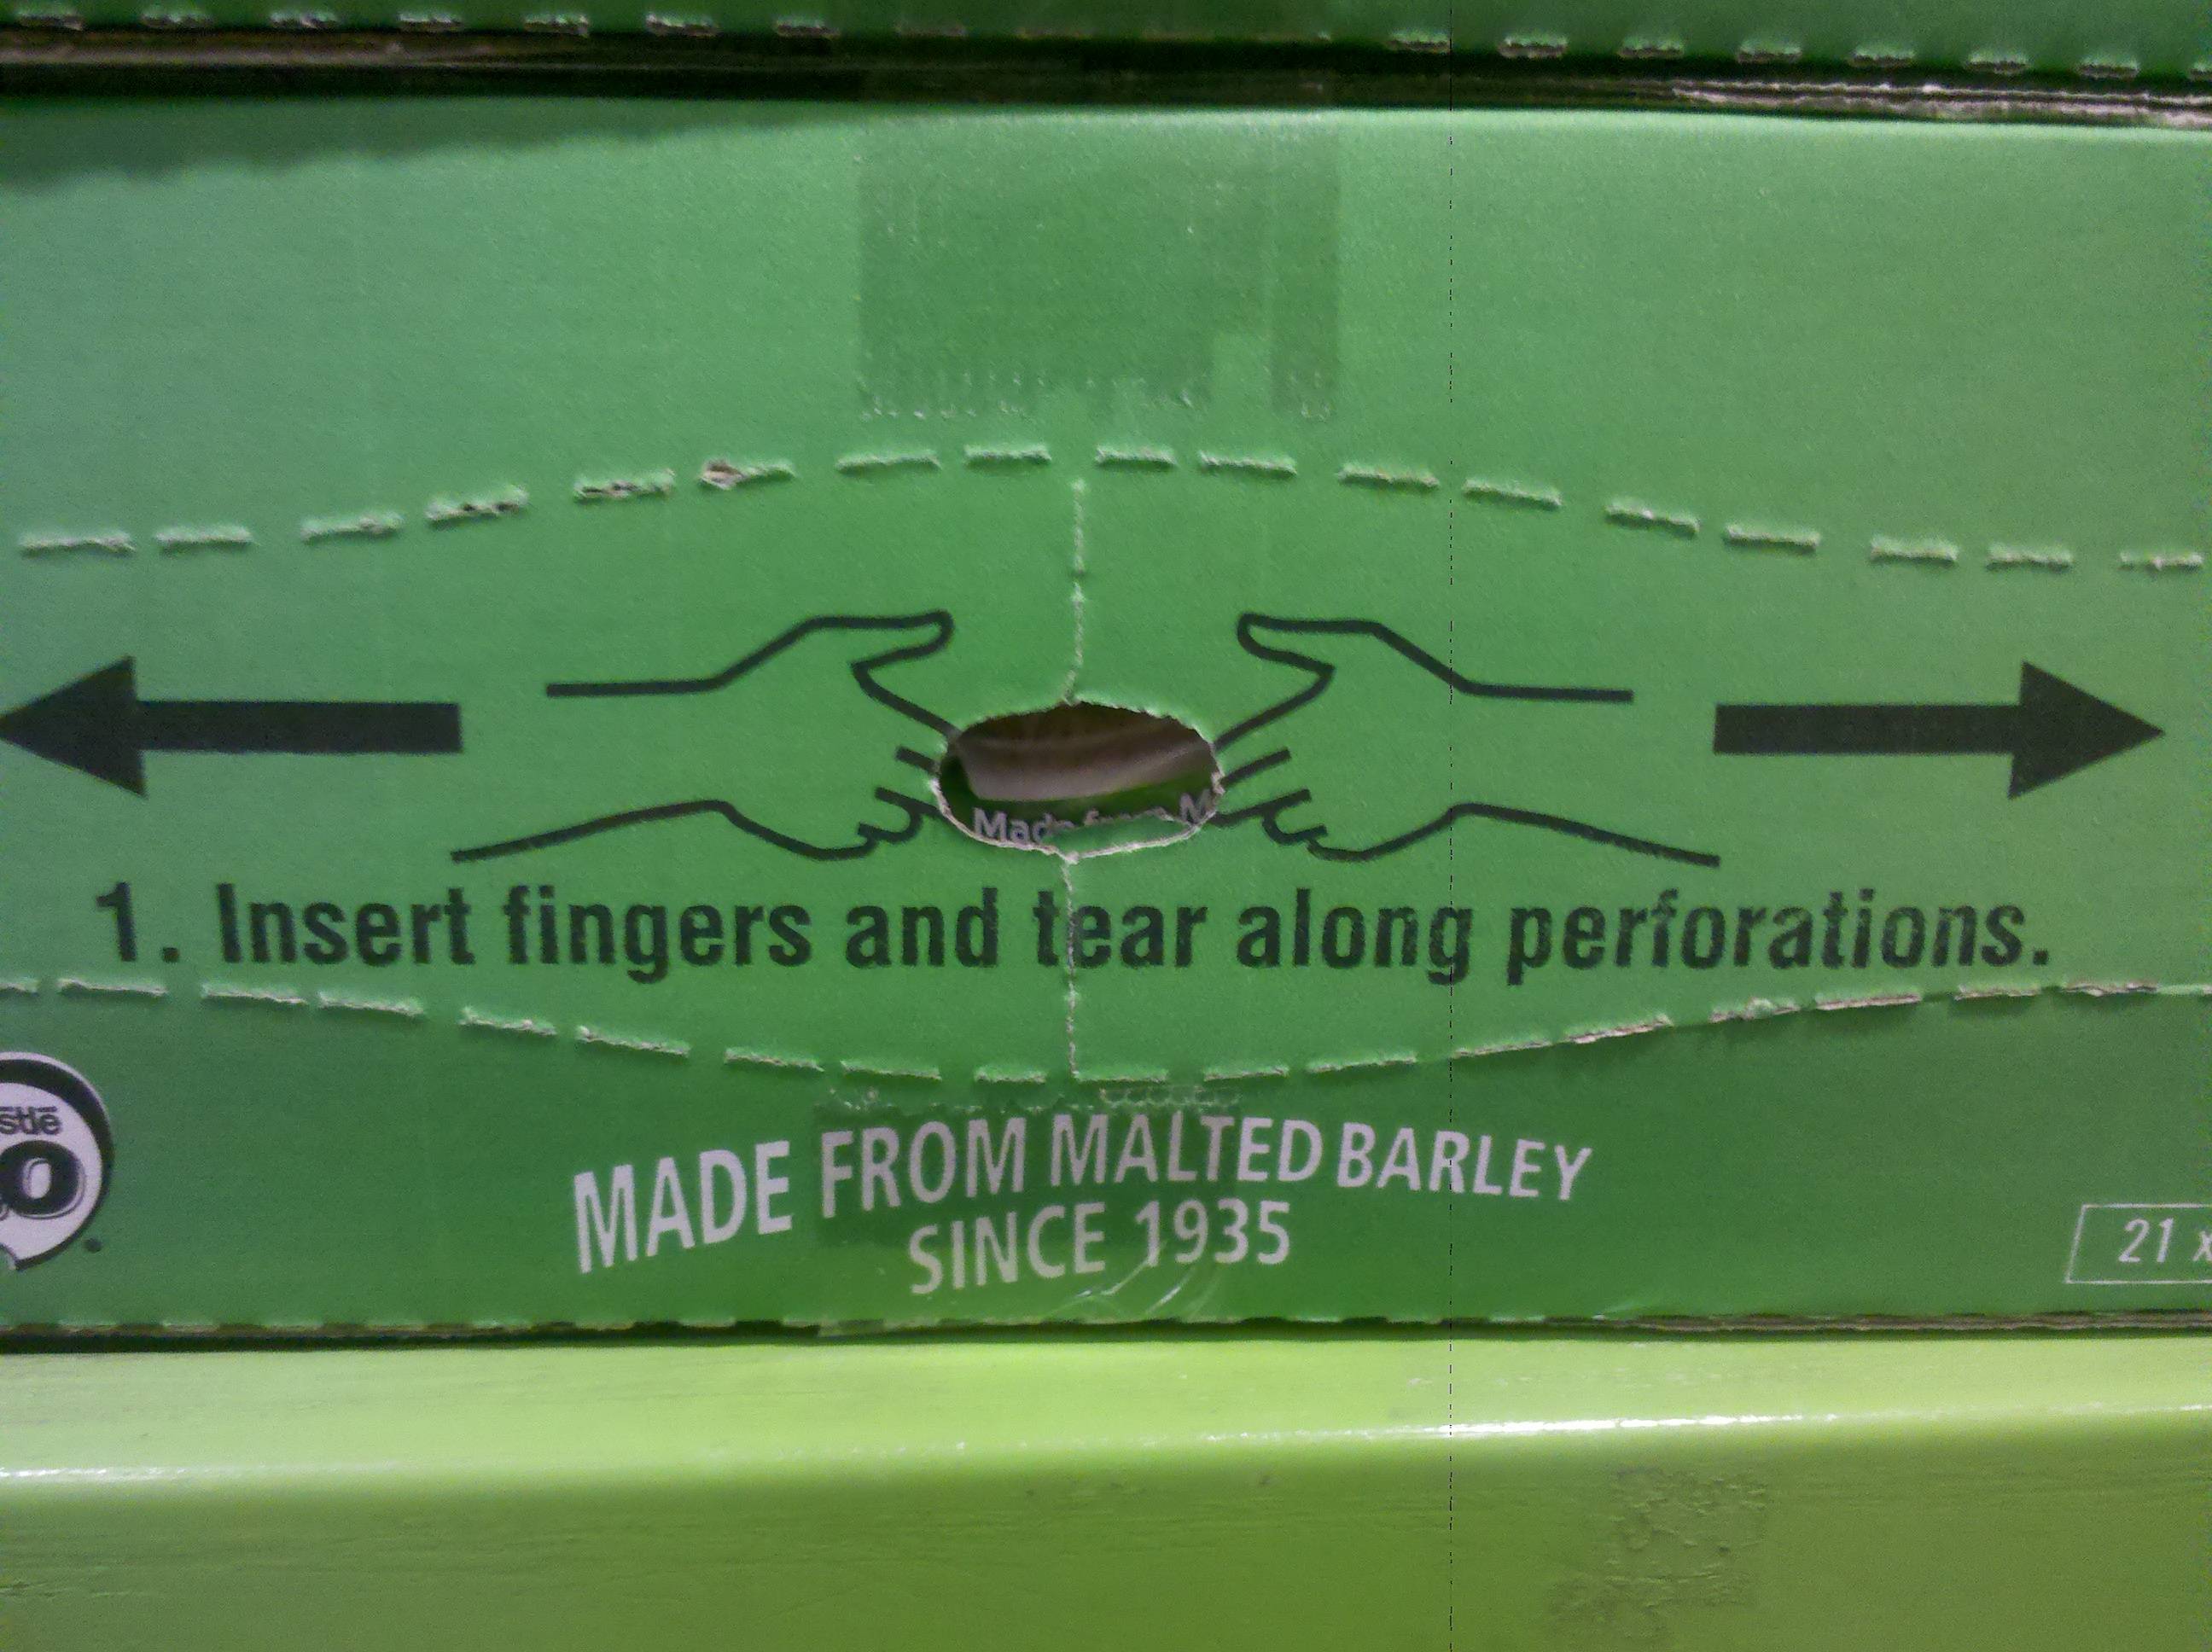 grass - 1. Insert fingers and tear along perforations. sue Ade From Malted Barley Made Since 1935 212